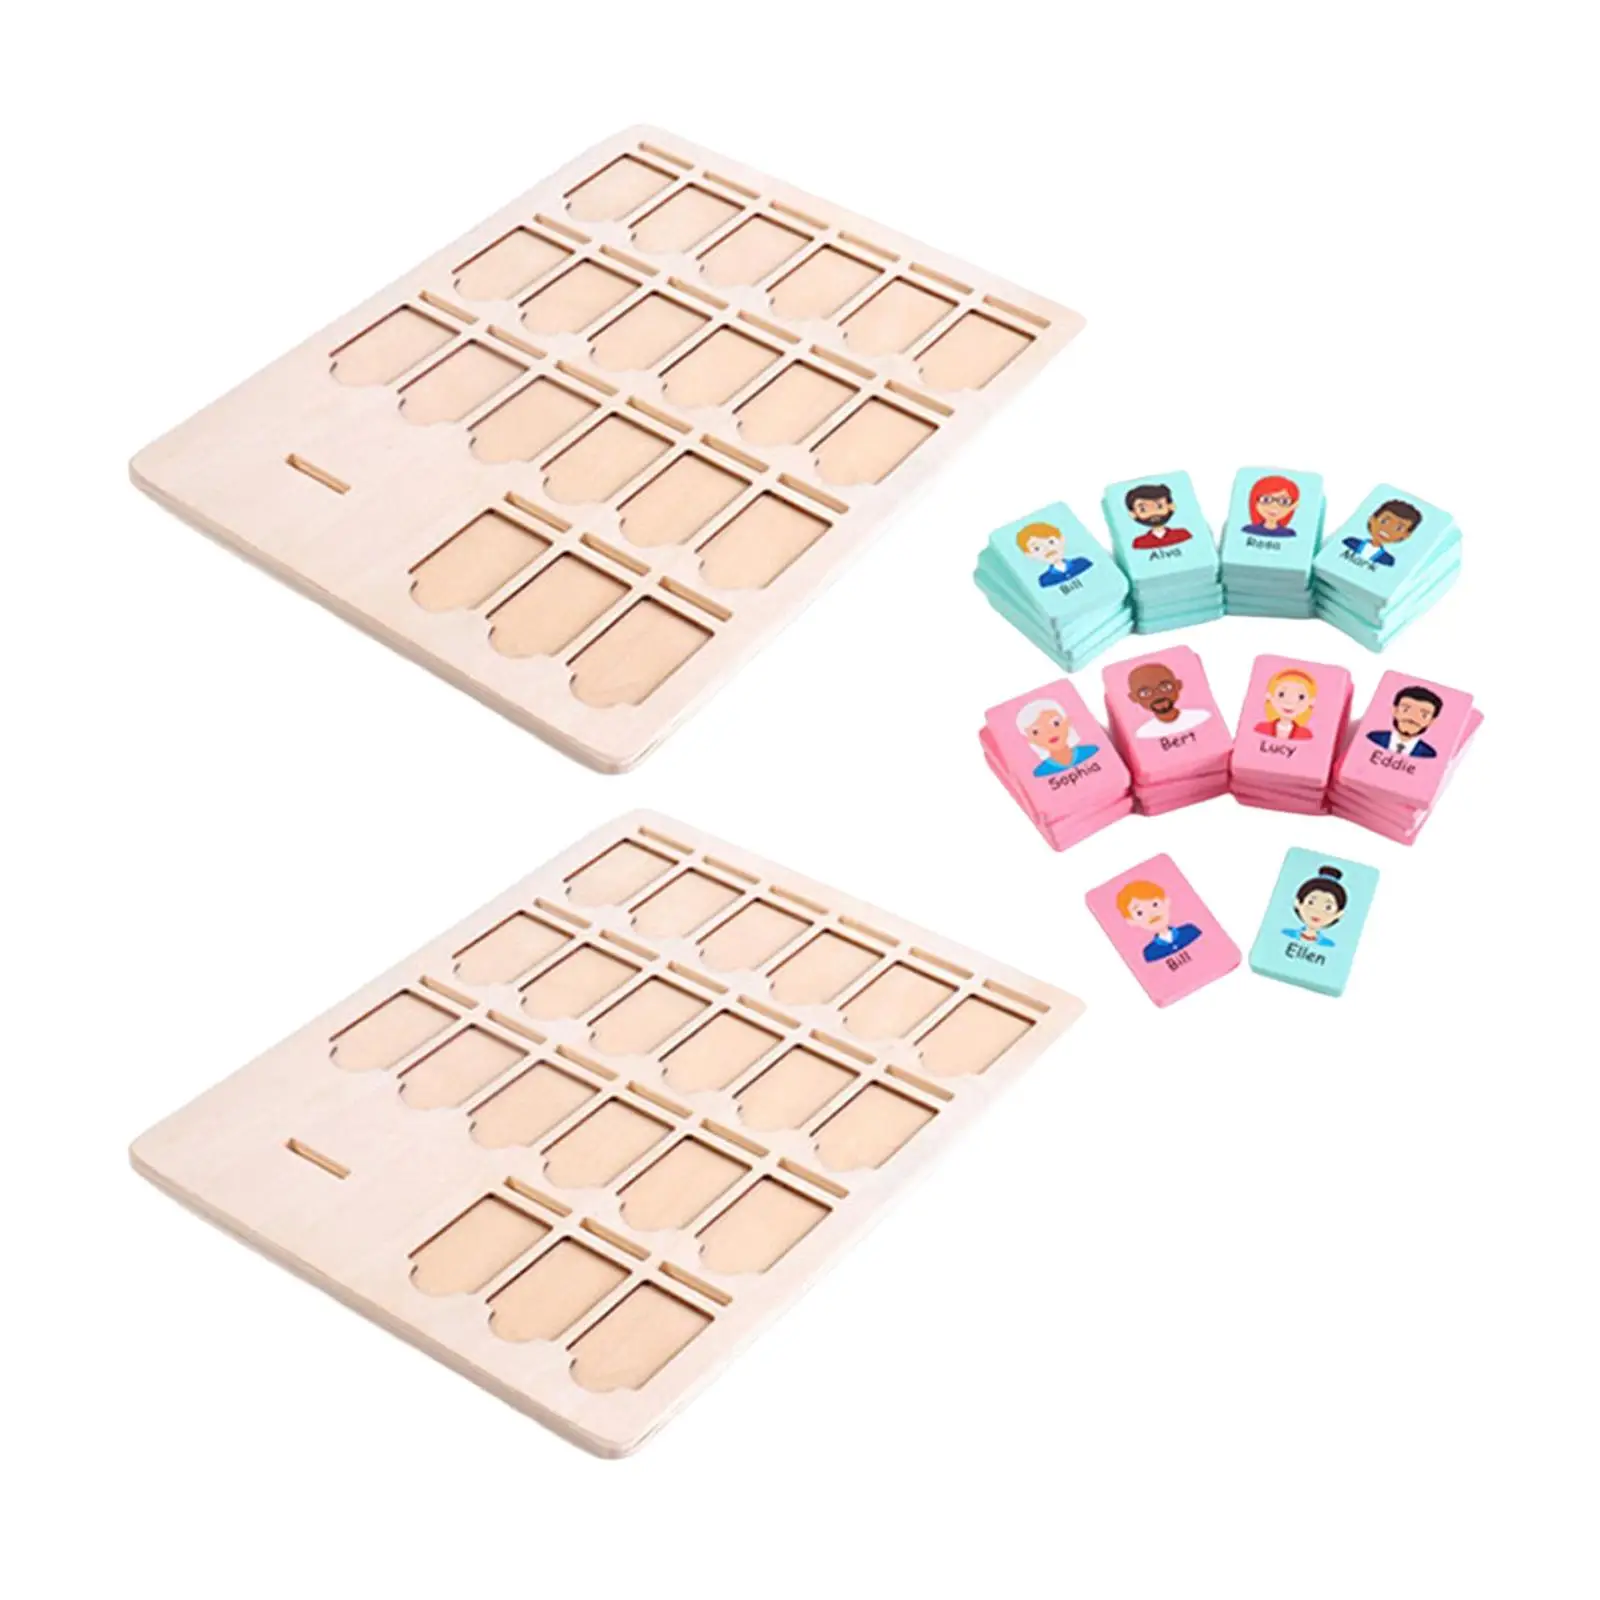 Family Guessing Game Who Classic Board toys Memory Games Learning Activities Puzzle toys Game Leisure Time Training